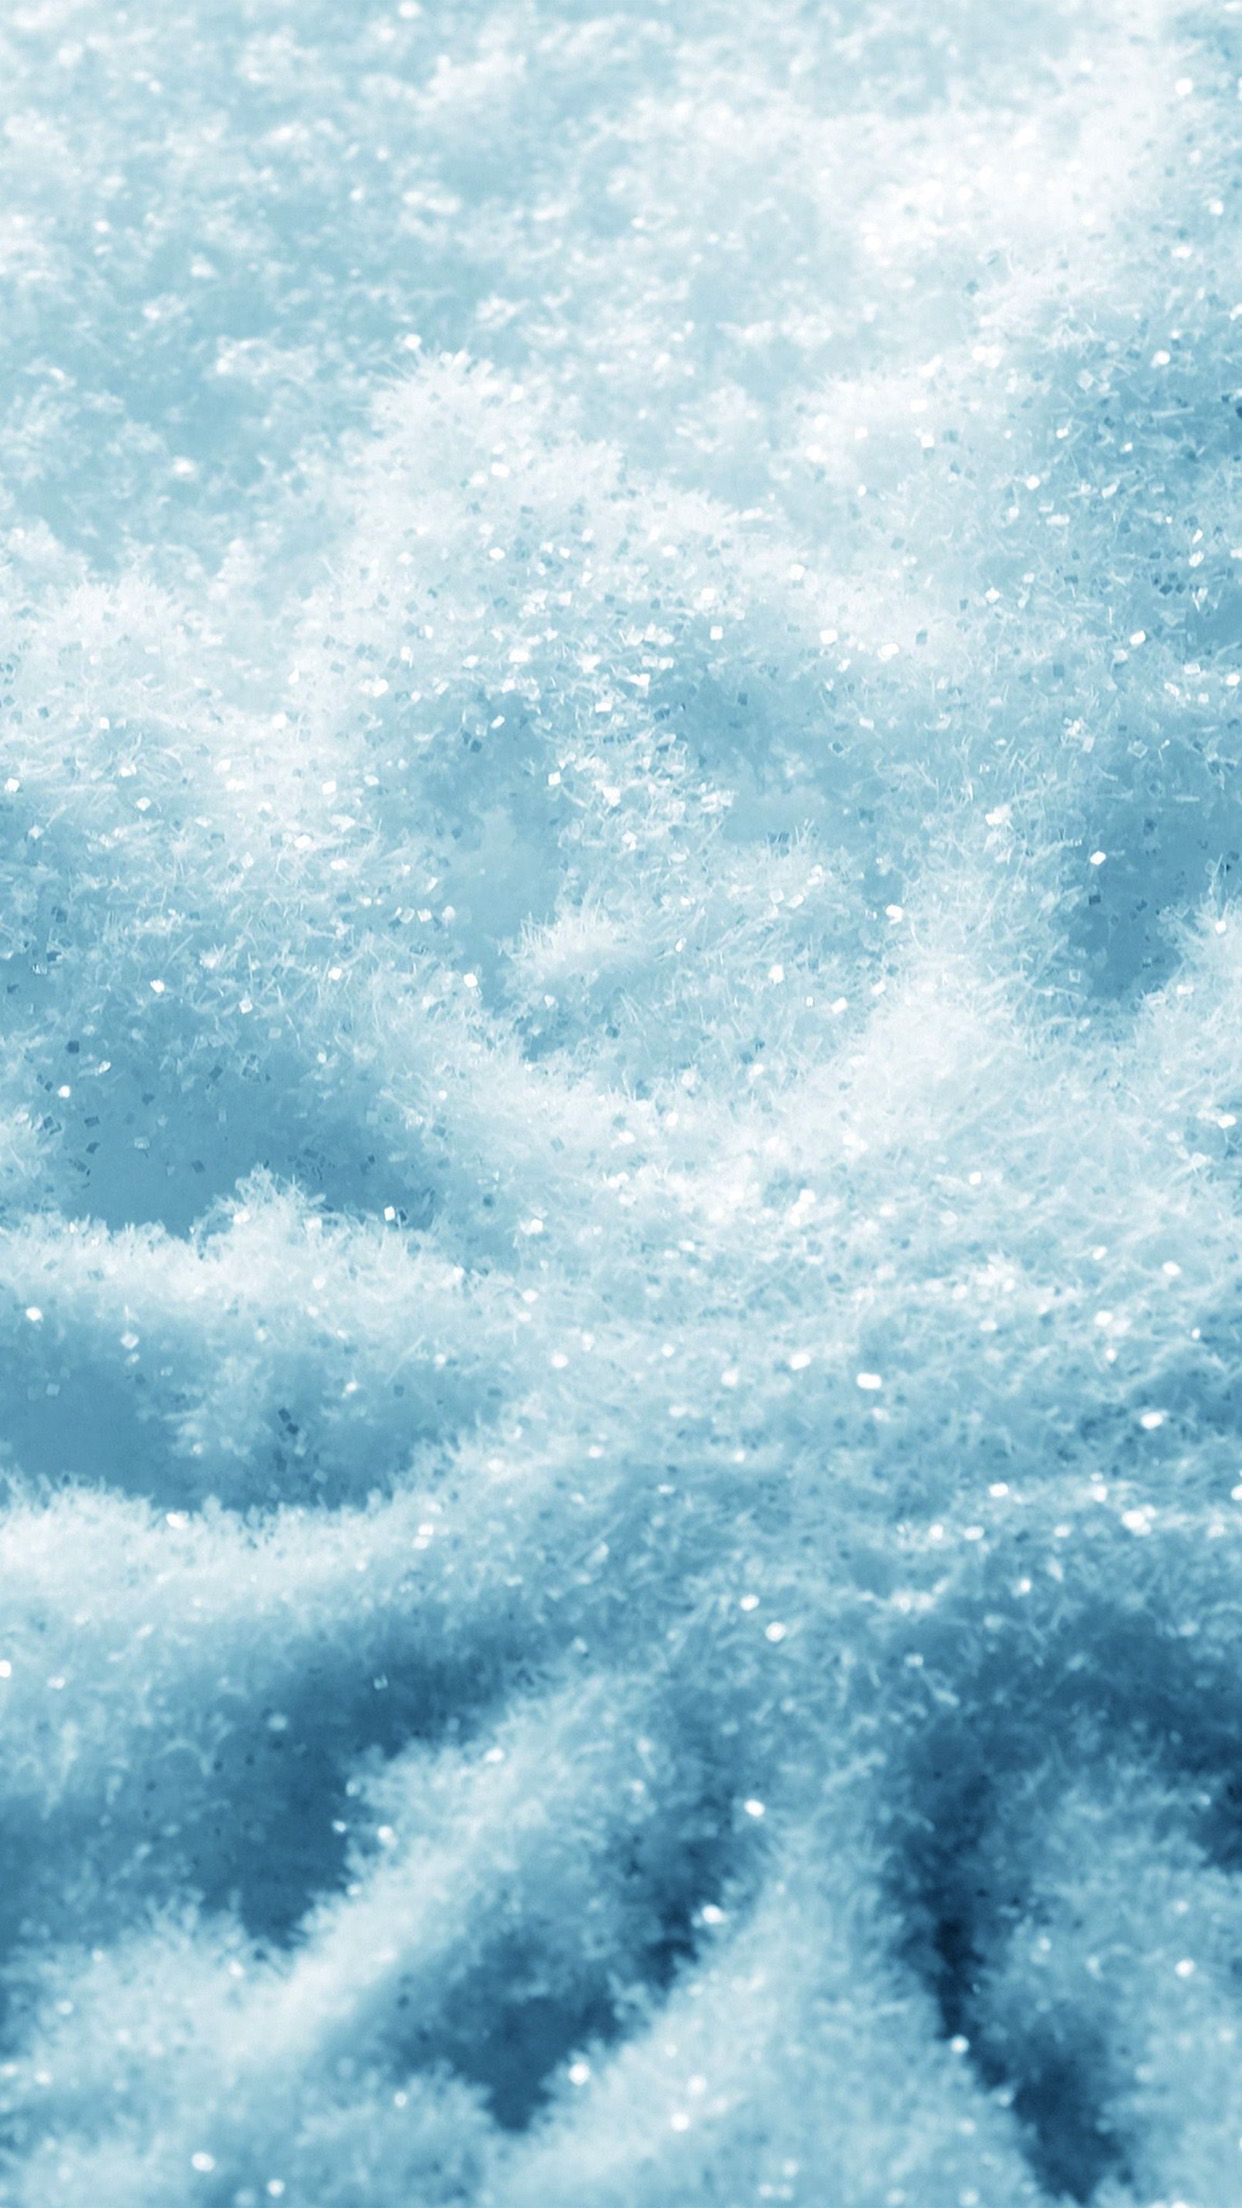 Snow ice winter texture pattern Download Free HD Wallpapers for